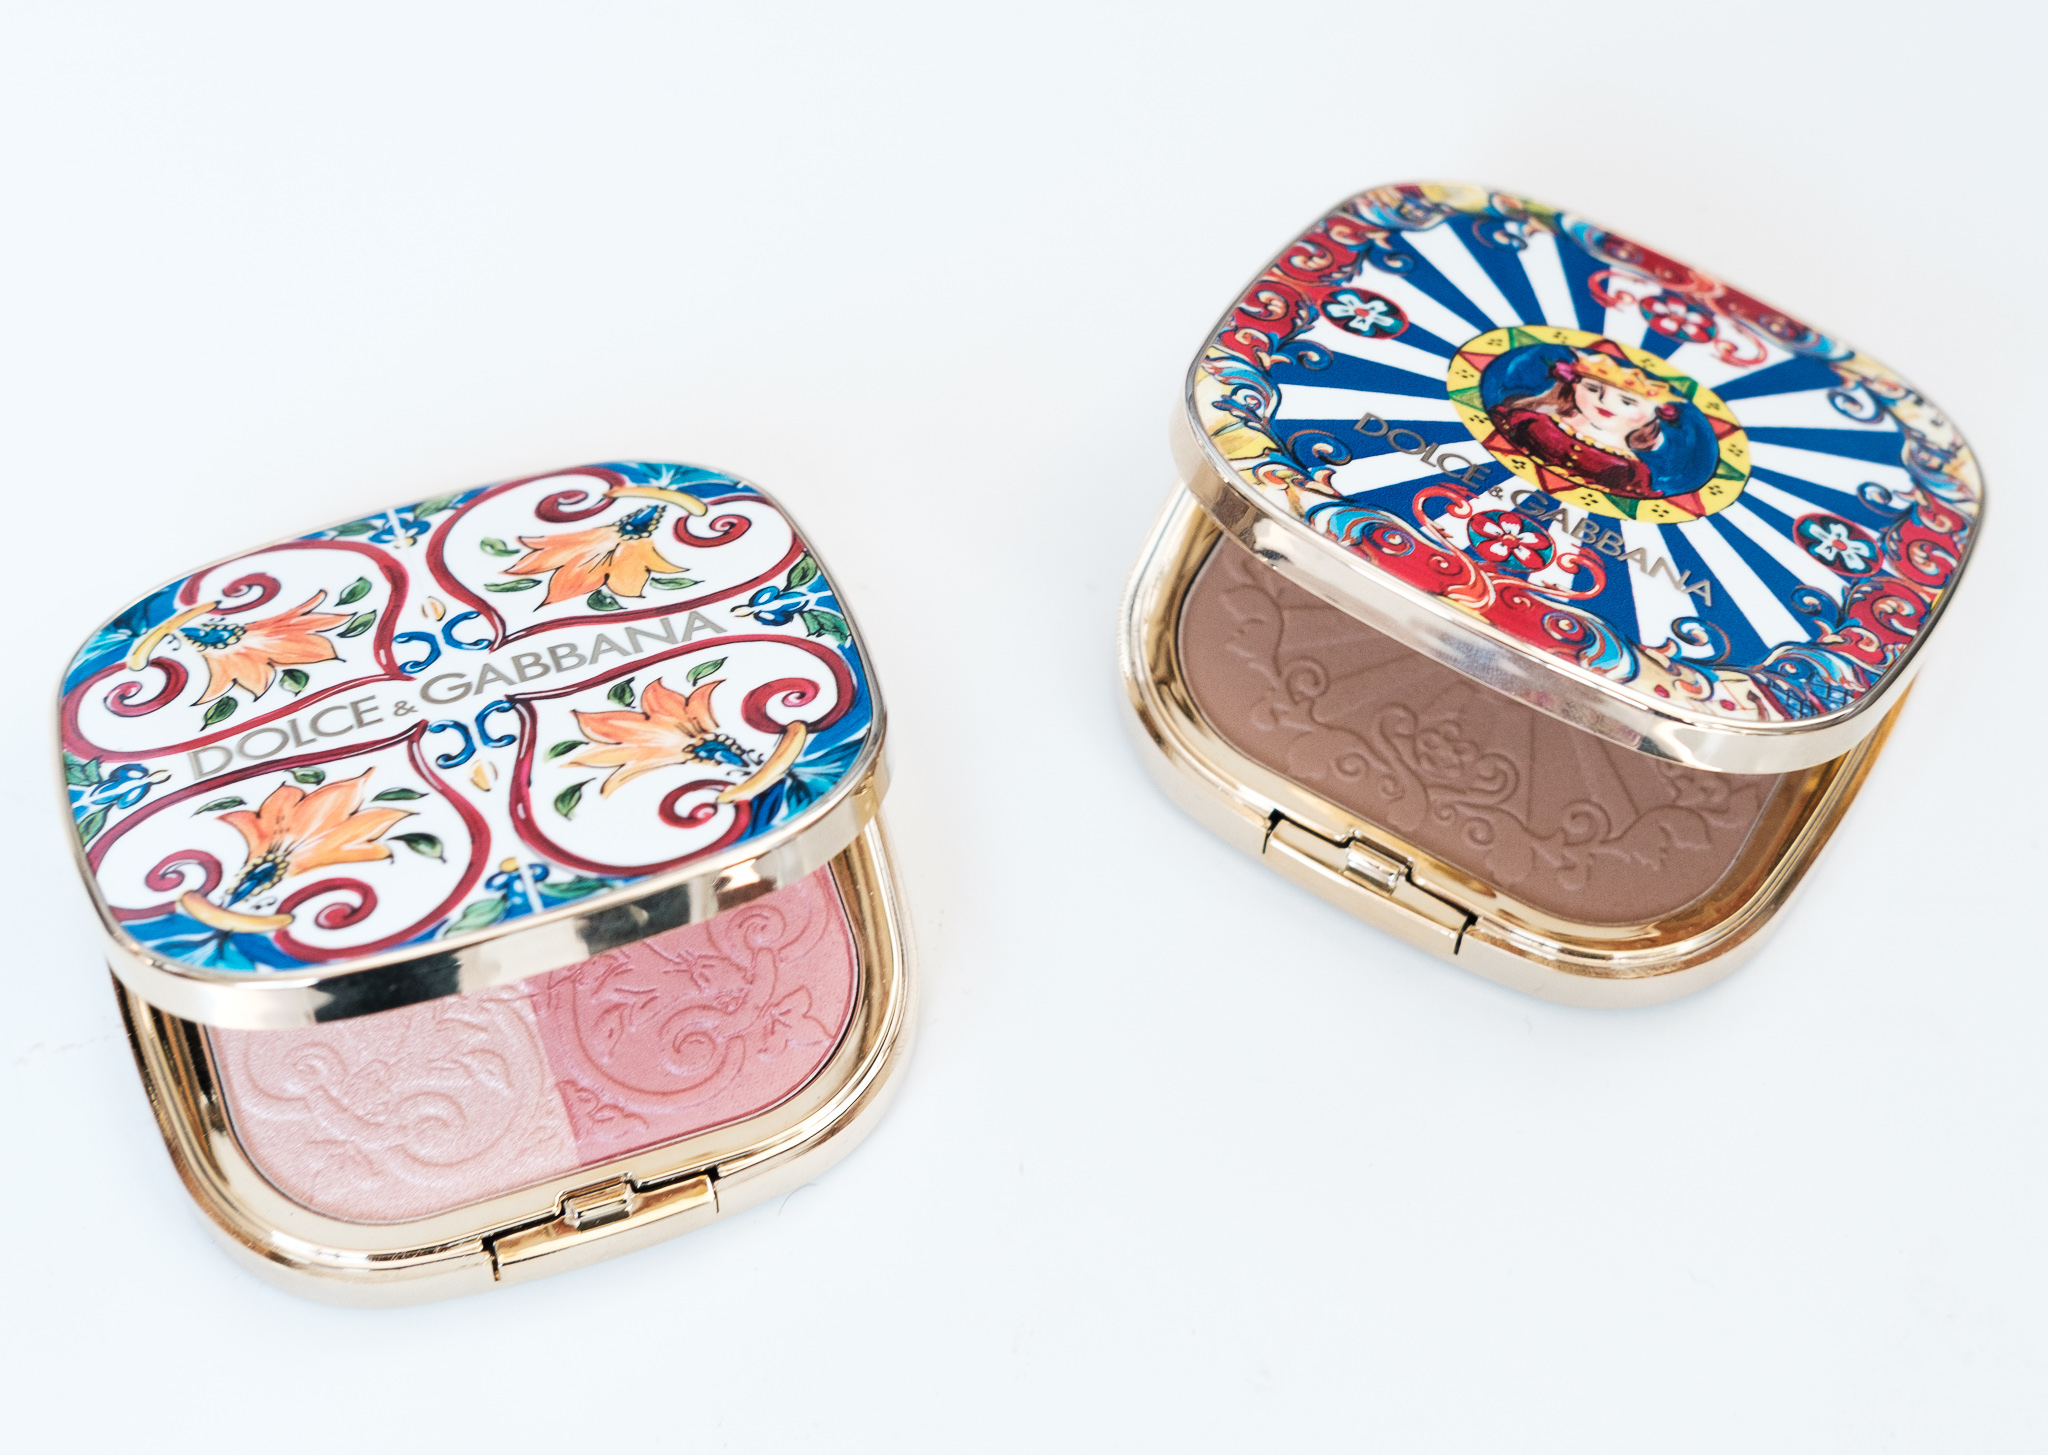 Review, Swatches | Dolce & Gabbana Solar Glow: Ultra-Light Bronzing Powder  in Sand, Illuminating Powder Duo in Peach Blossom - Just head over, heels